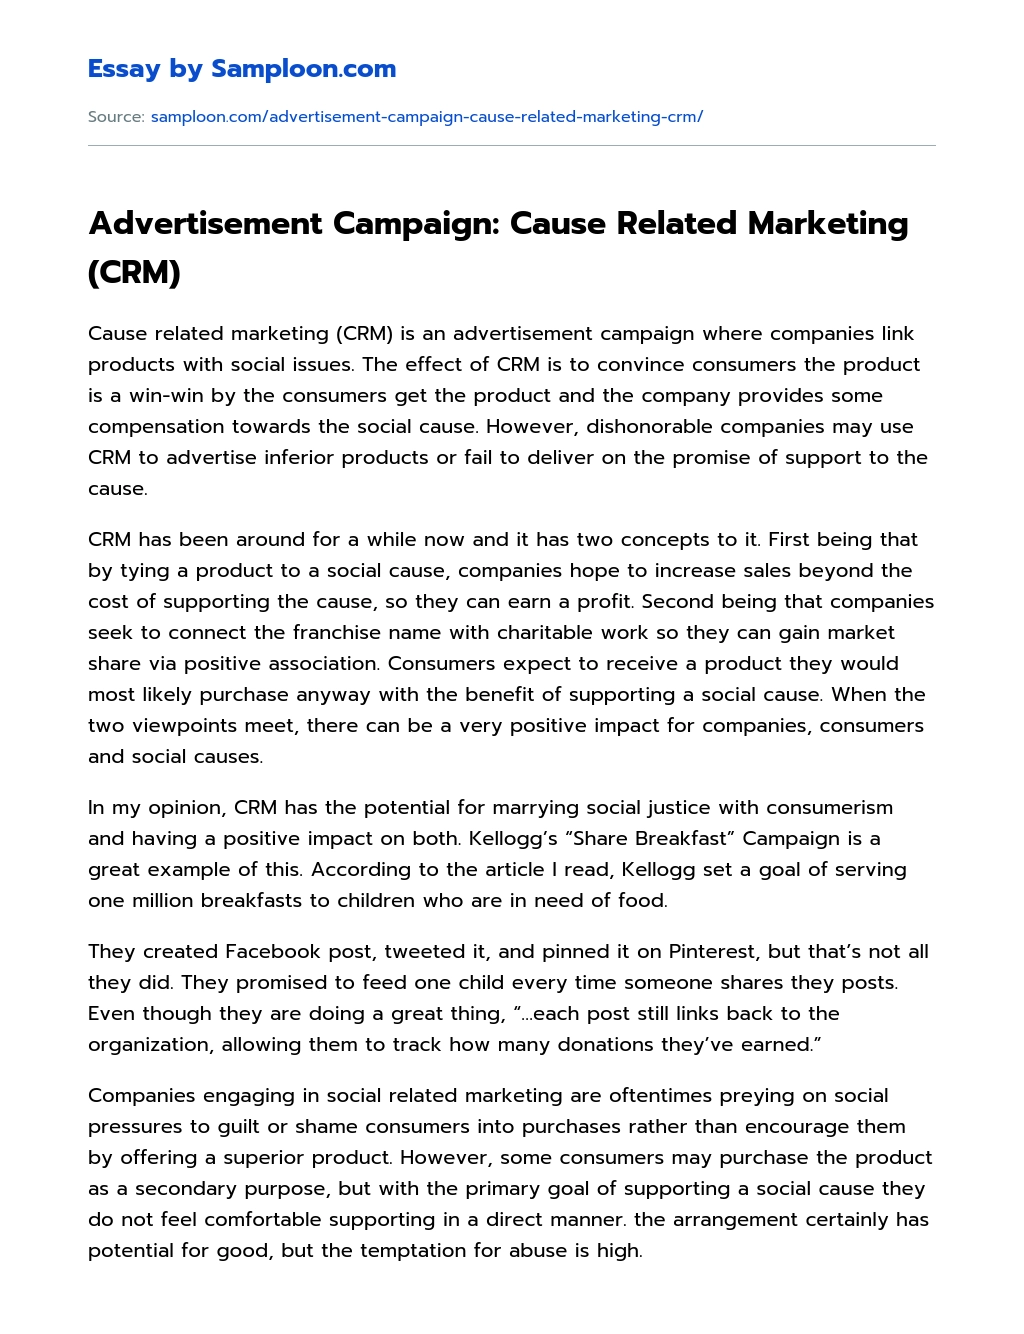 Advertisement Campaign: Cause Related Marketing (CRM) essay